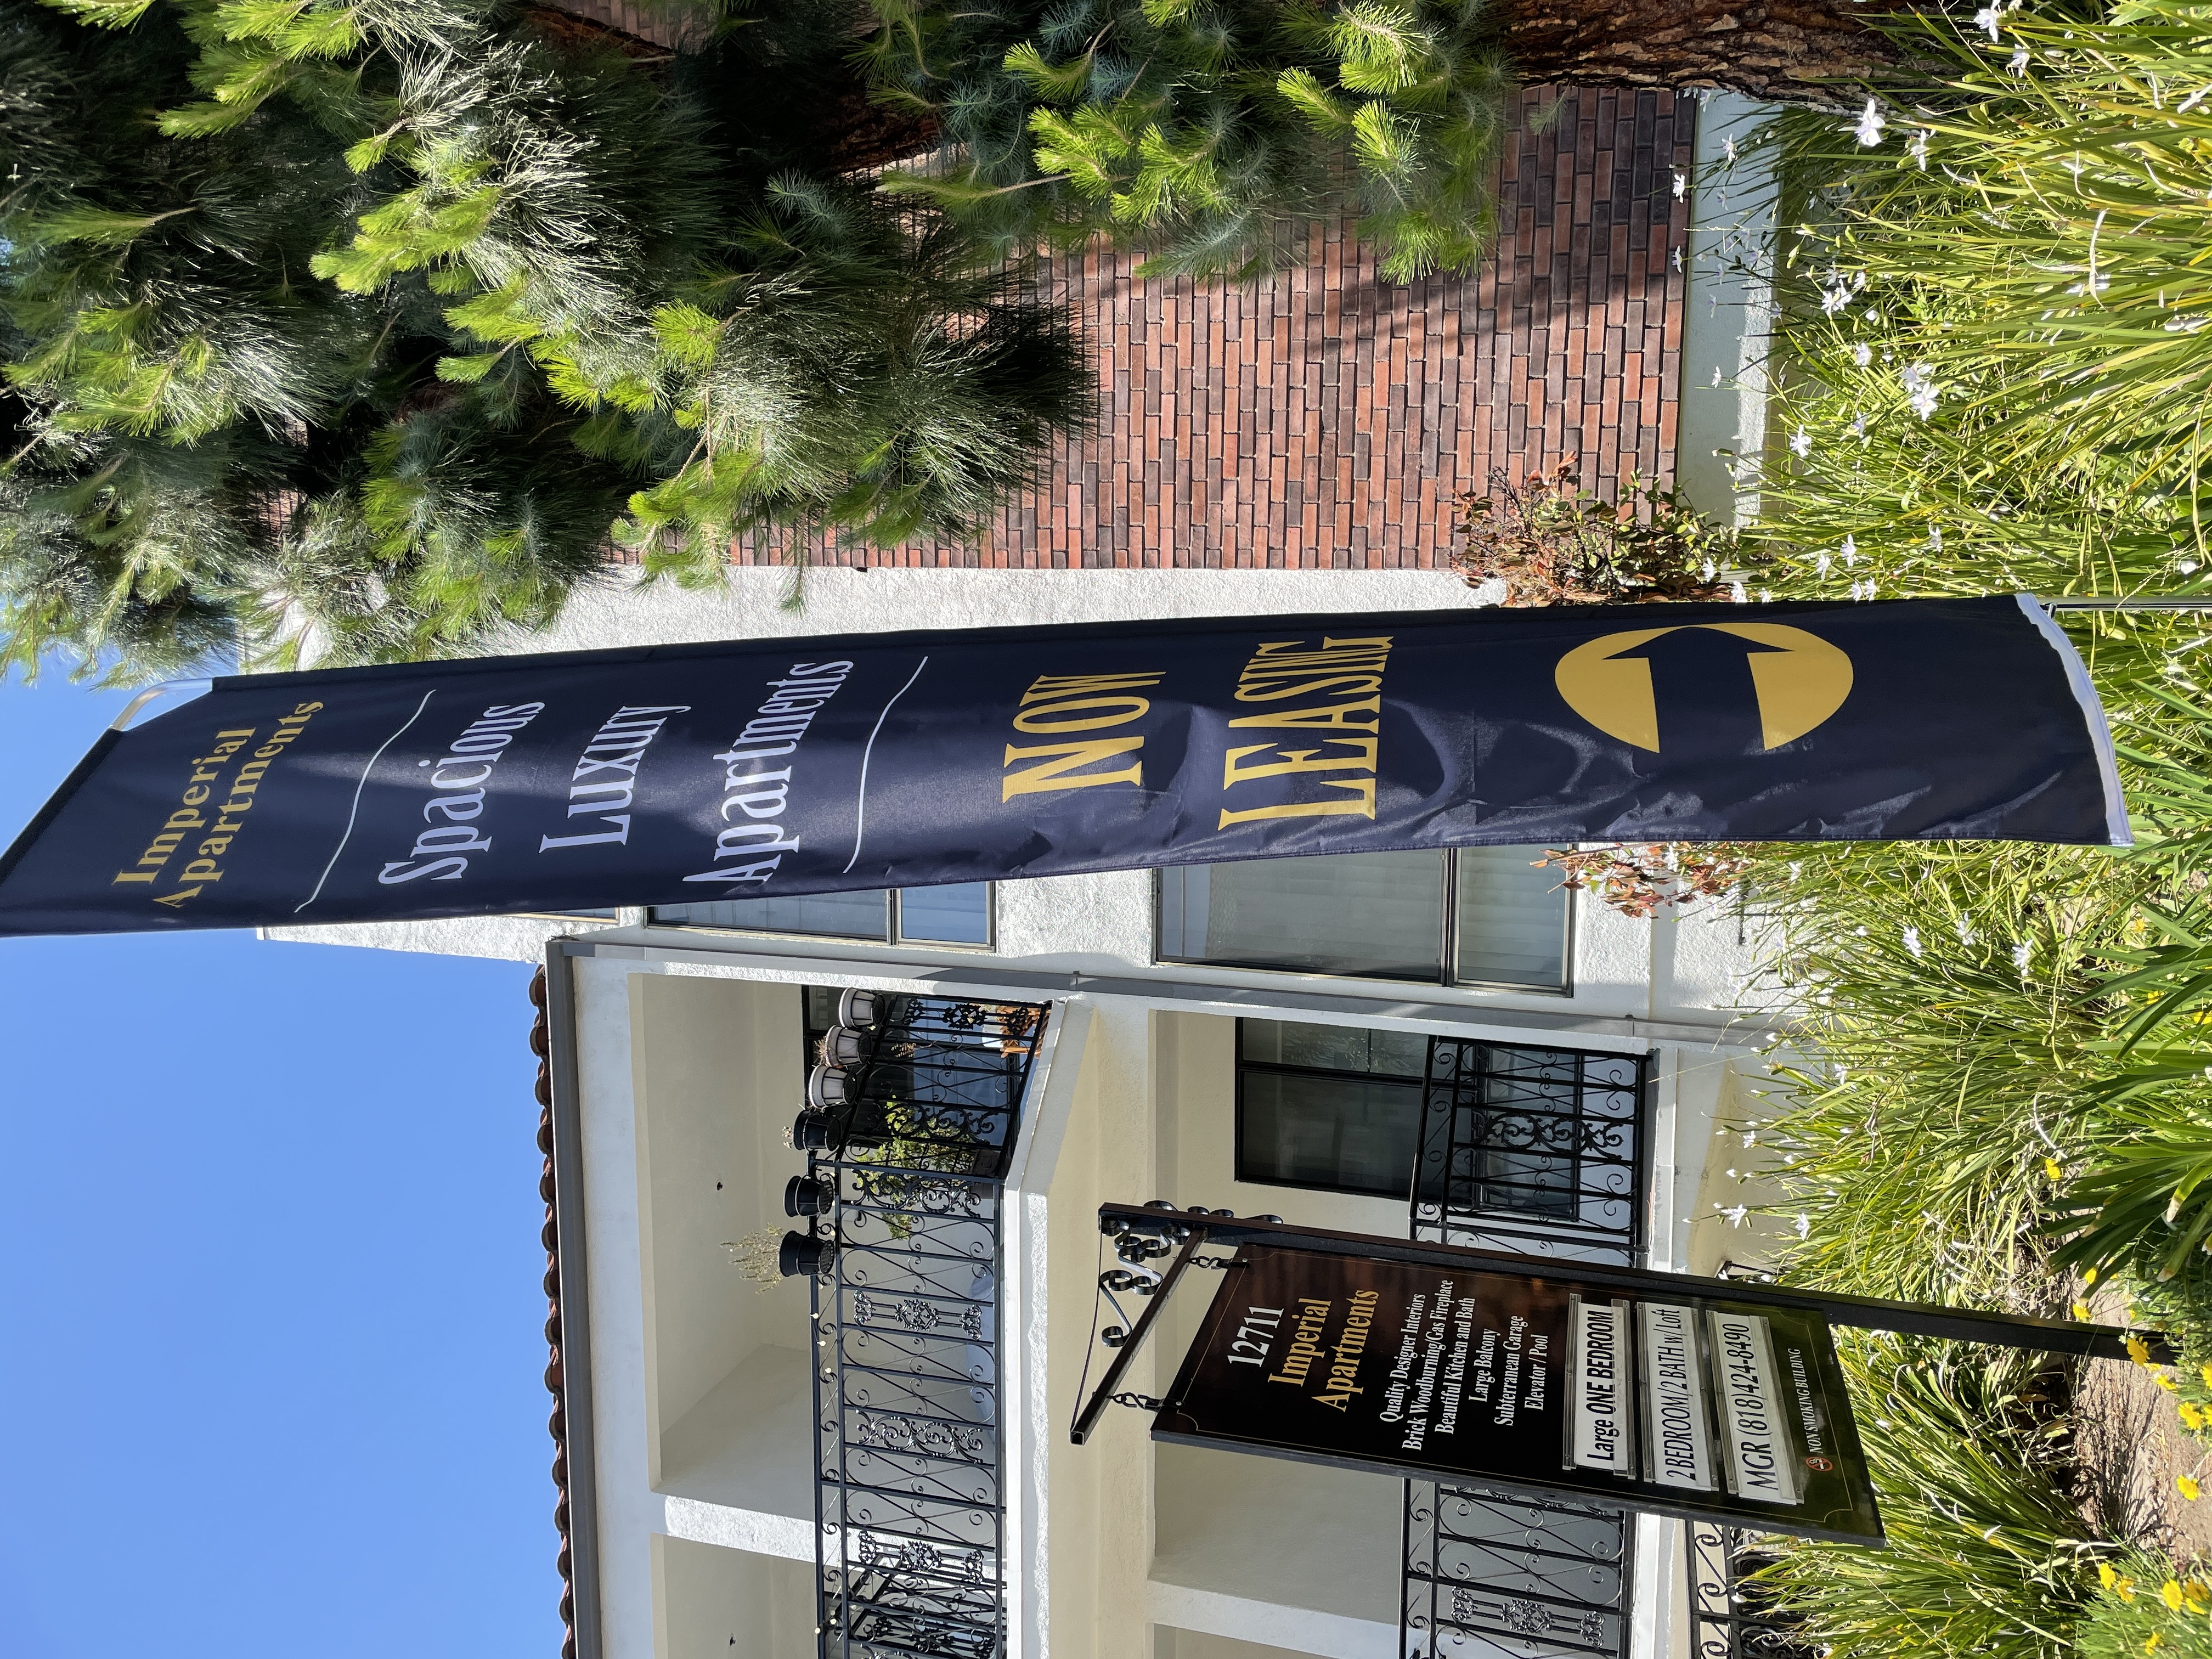 Real estate firms can reach customers better with advertisement banners detailing their properties. Like our signs for Imperial Apartments in Studio Cities.